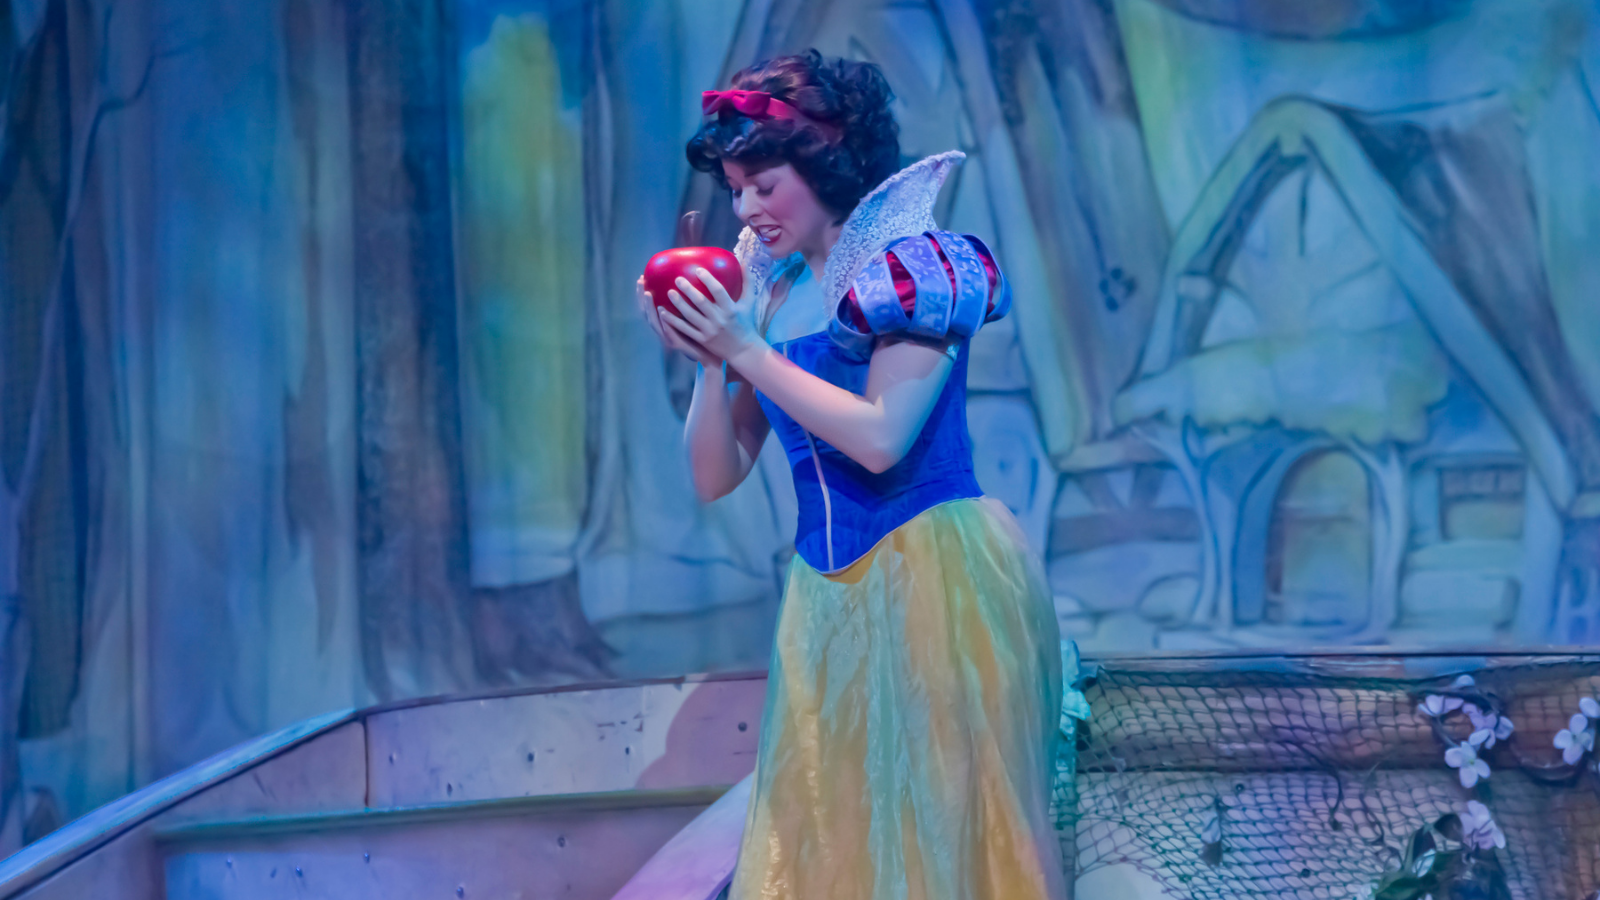 A woman dressed as Snow white holding an apple.